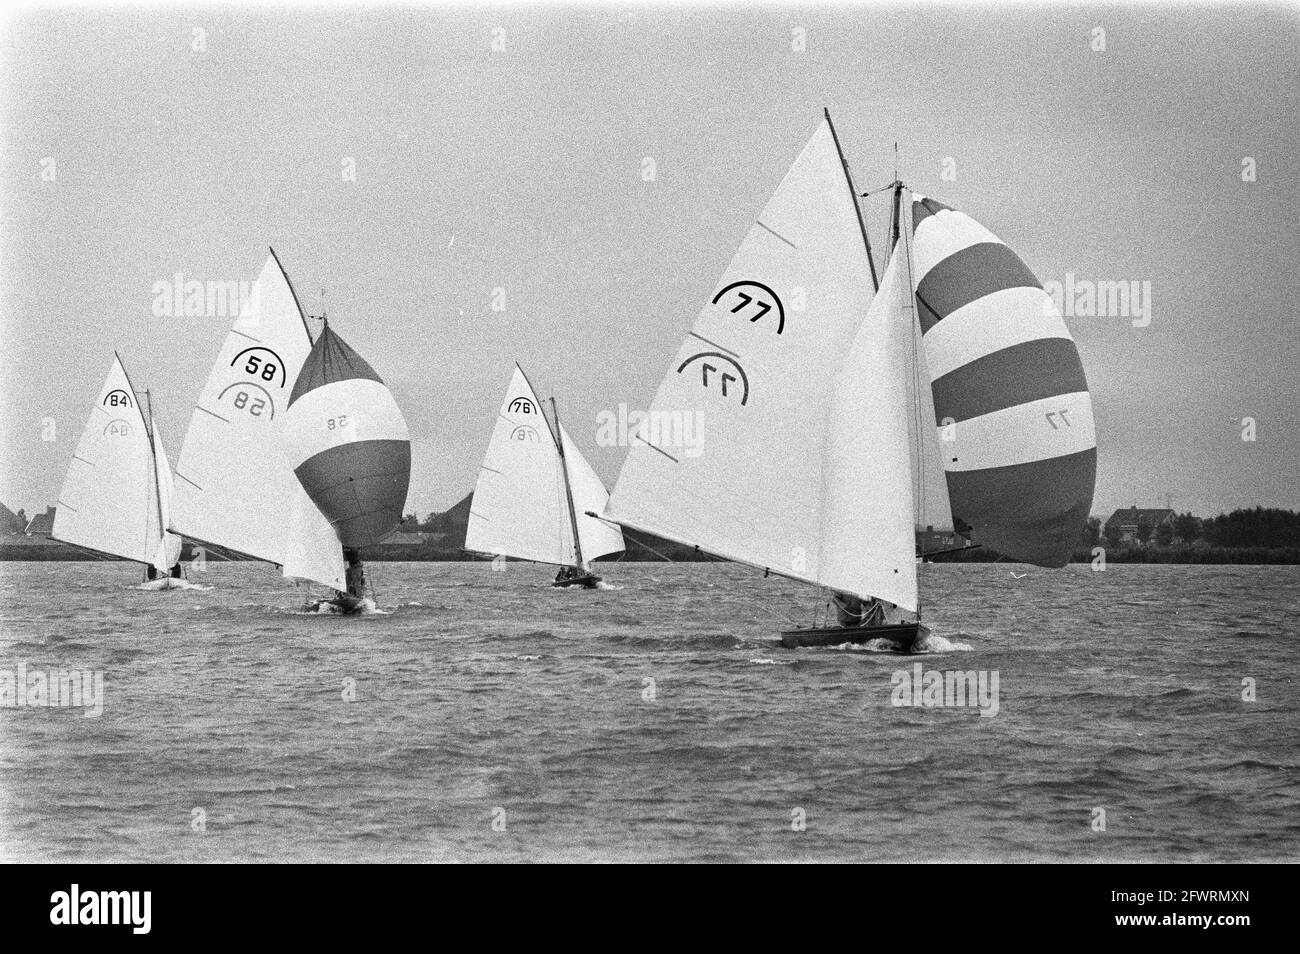 Dutch Championships Rainbow Class sailing on Alkmaardermeer; overview ships with spinnakers, July 19, 1970, CHAMPIONSHIPS, SHIPS, Sails, The Netherlands, 20th century press agency photo, news to remember, documentary, historic photography 1945-1990, visual stories, human history of the Twentieth Century, capturing moments in time Stock Photo